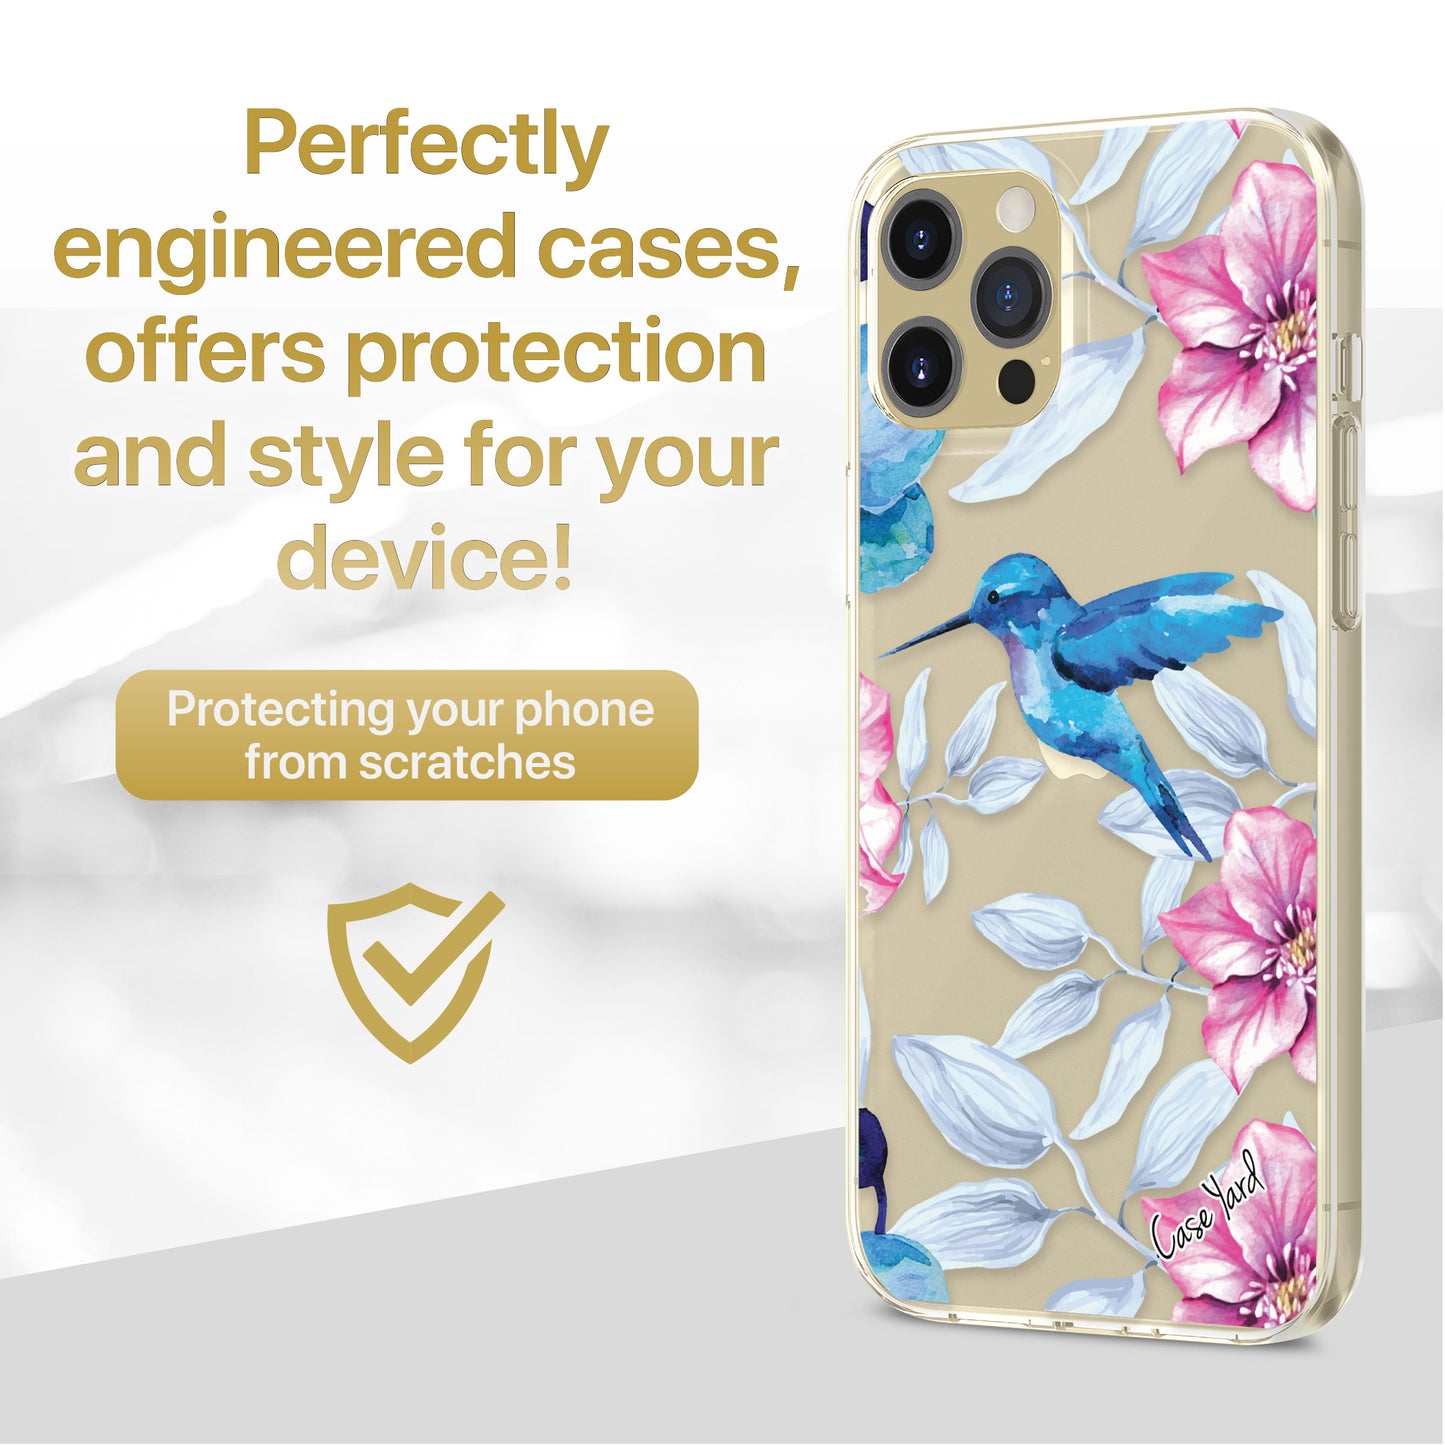 TPU Clear case with (Summer Hummingbird) Design for iPhone & Samsung Phones